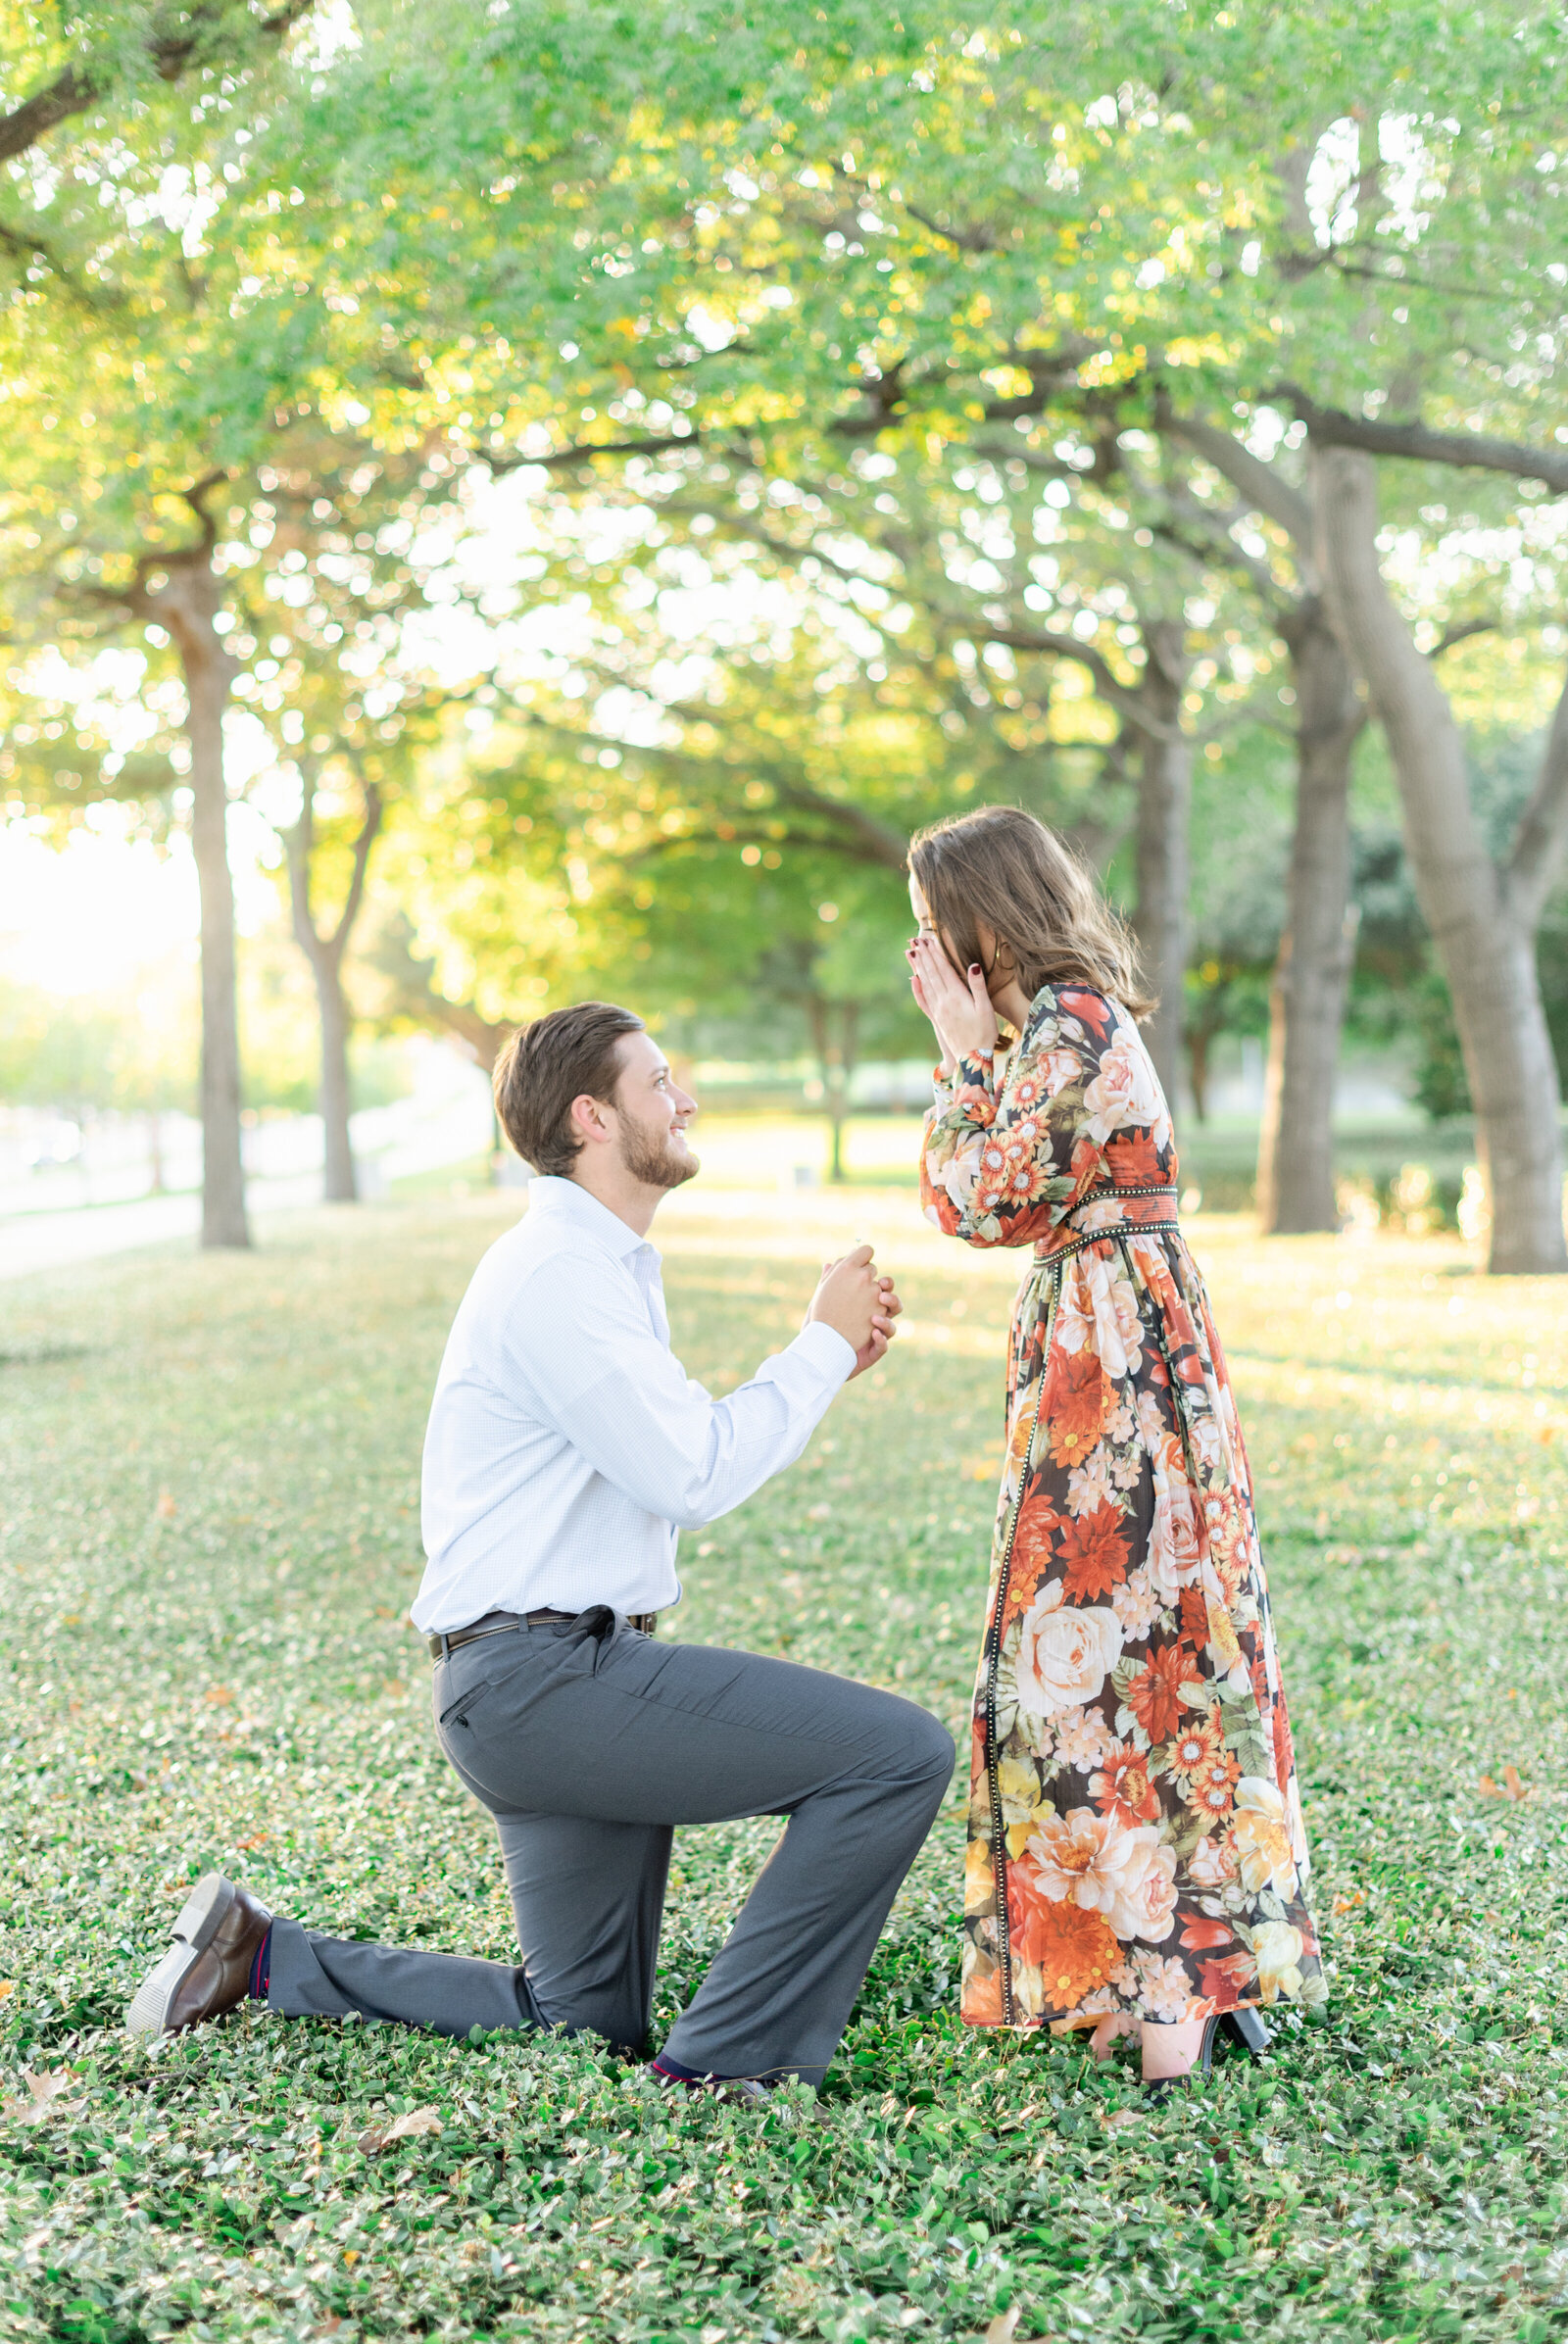 Portrait of a man kneeling and holding a jewewerly box in front of a surprised woman in a floral dress at a park.